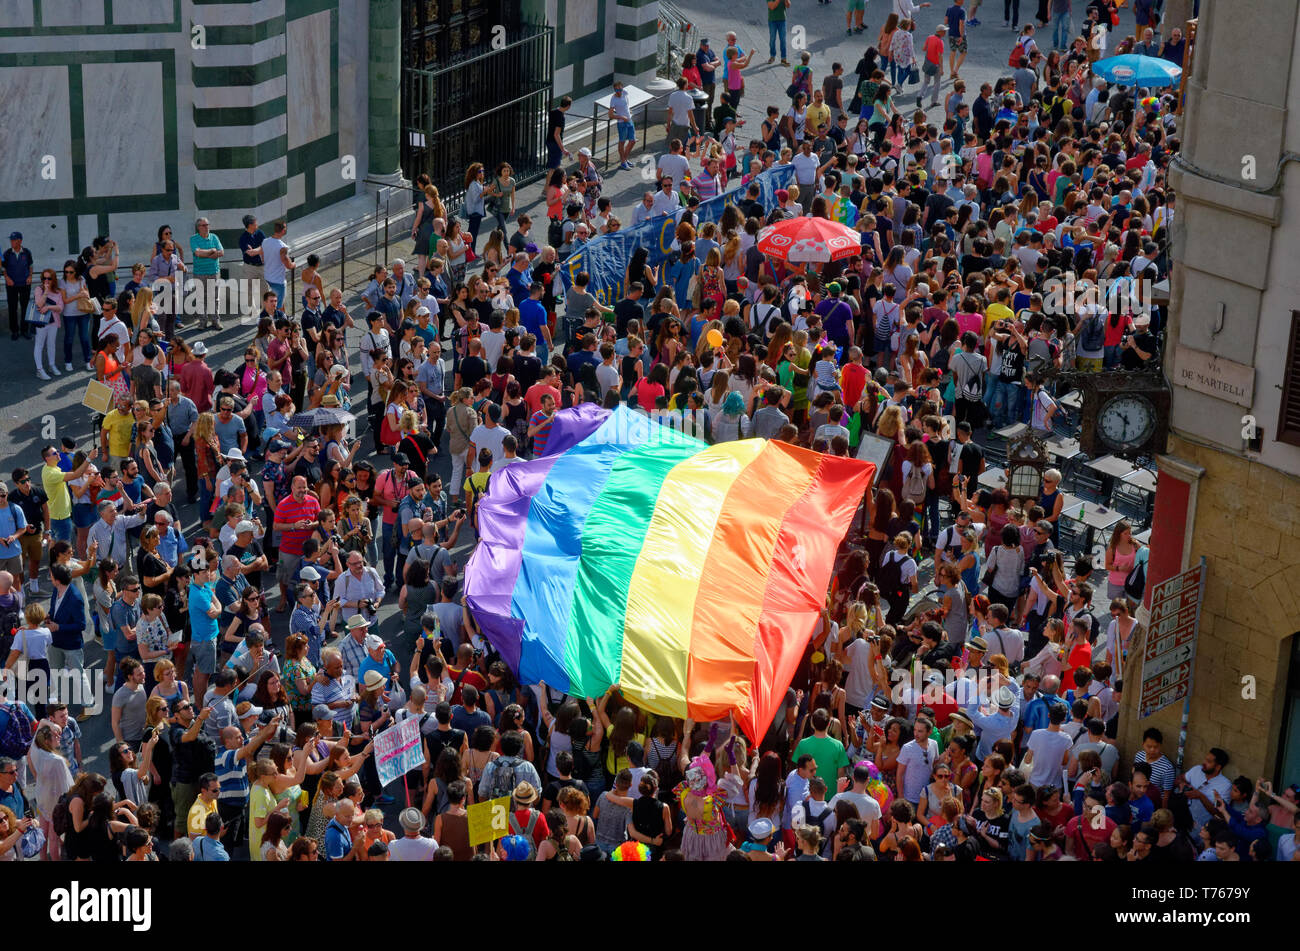 A view over a 2016 gay pride march entering Piazza del Duomo in Florence (Firenze), Italy, with a large rainbow flag being carried by the corwd Stock Photo